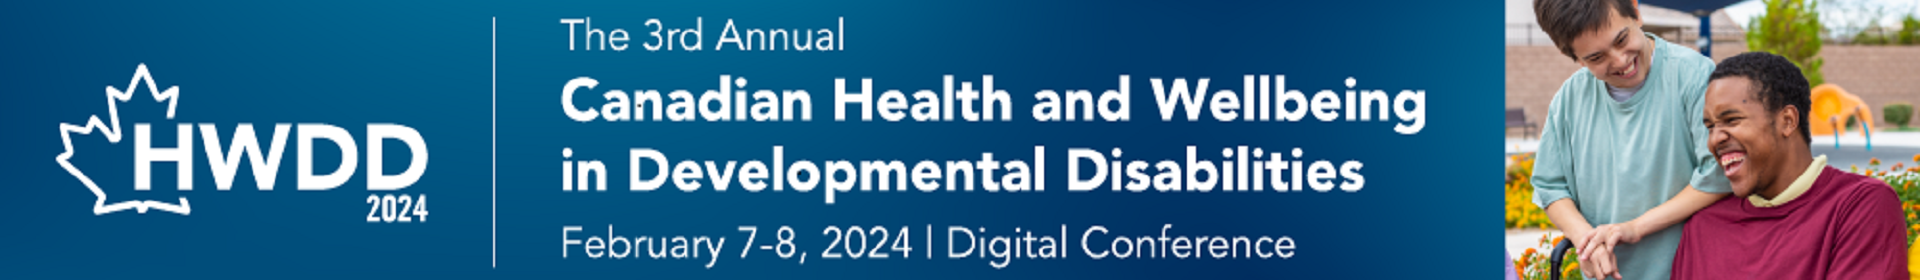 The 3rd Annual Canadian Health and Wellbeing in Developmental Disabilities Conference (HWDD 2024) Event Banner